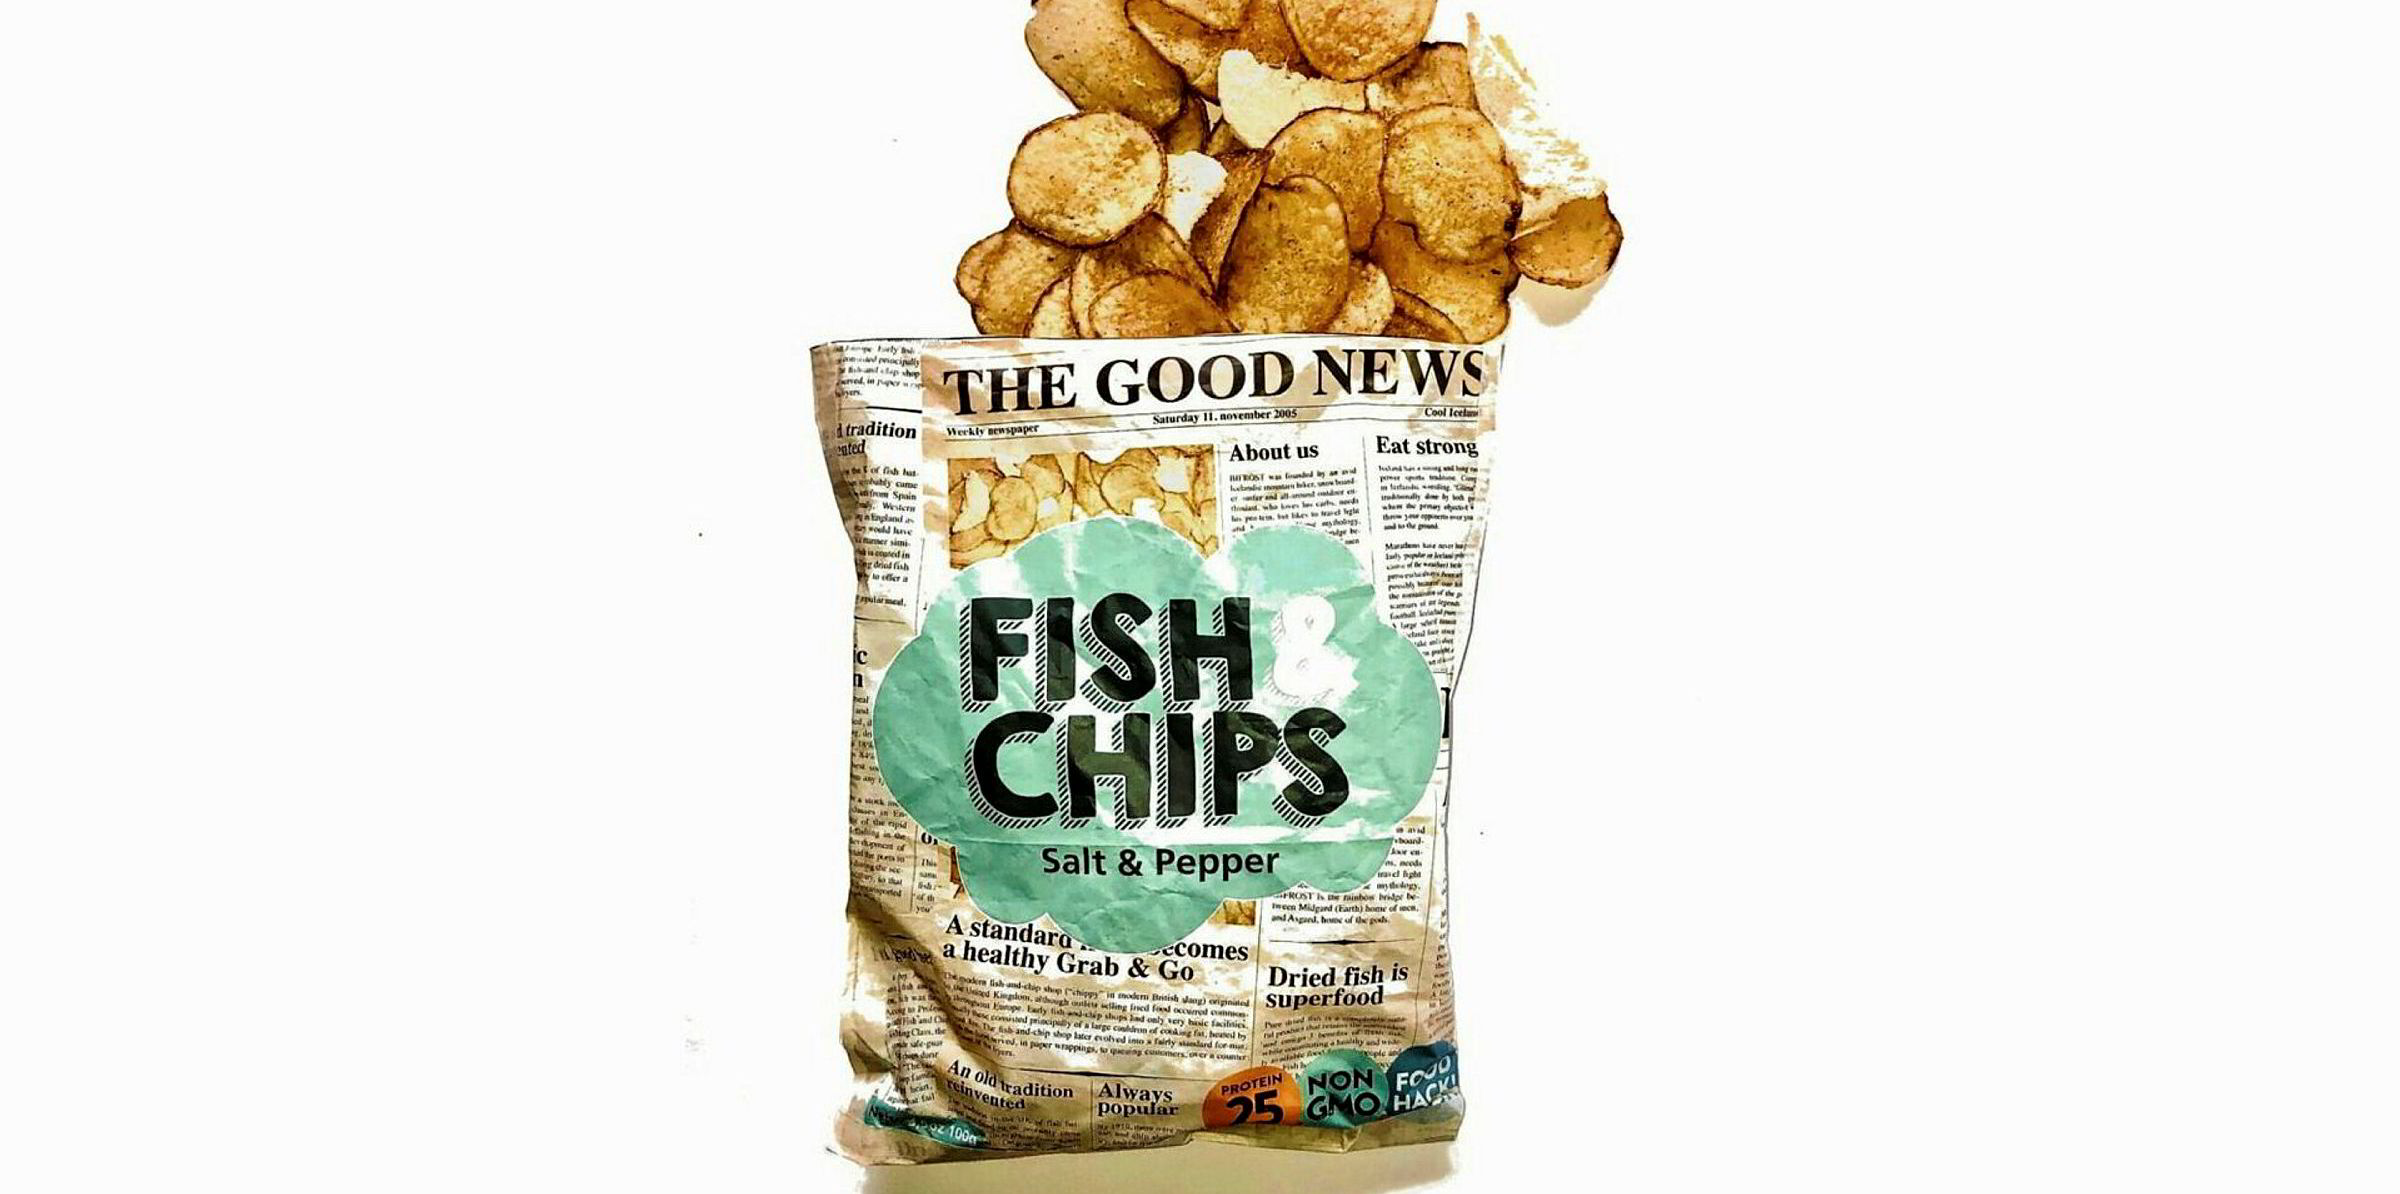 Icelandic startup transforms fish and chips into a bagged snack